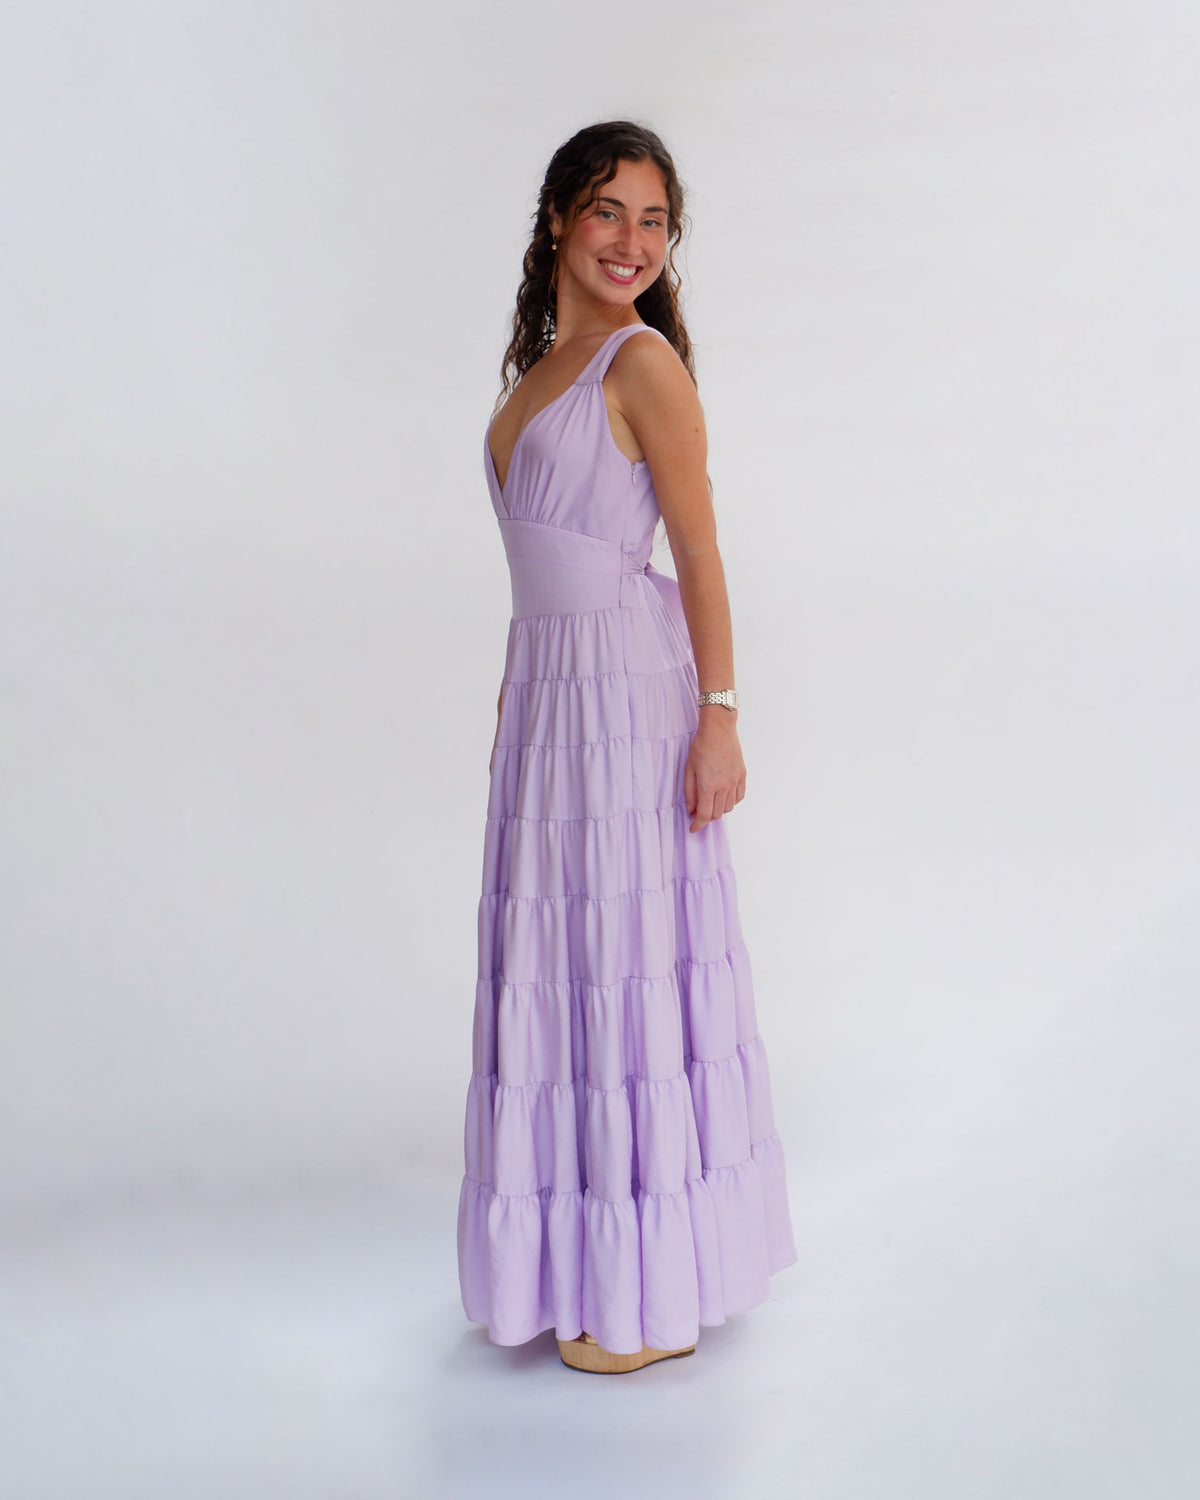 Tiered Summer Dress - Heather Lilac SERENA BUTE